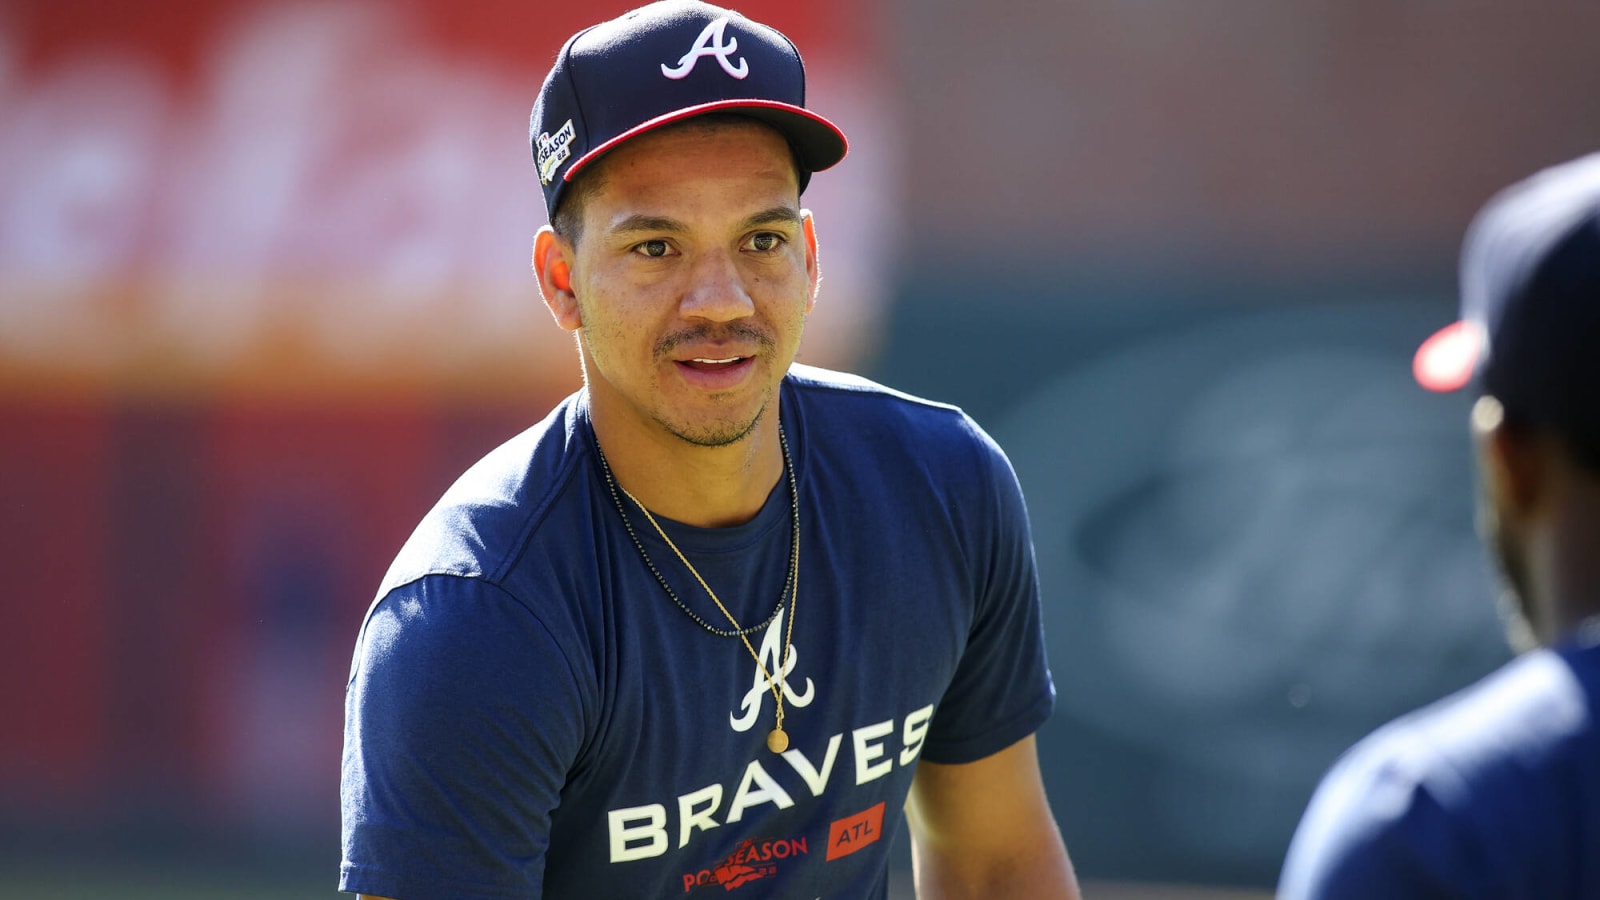 Braves Sign Ehire Adrianza To Minor League Deal